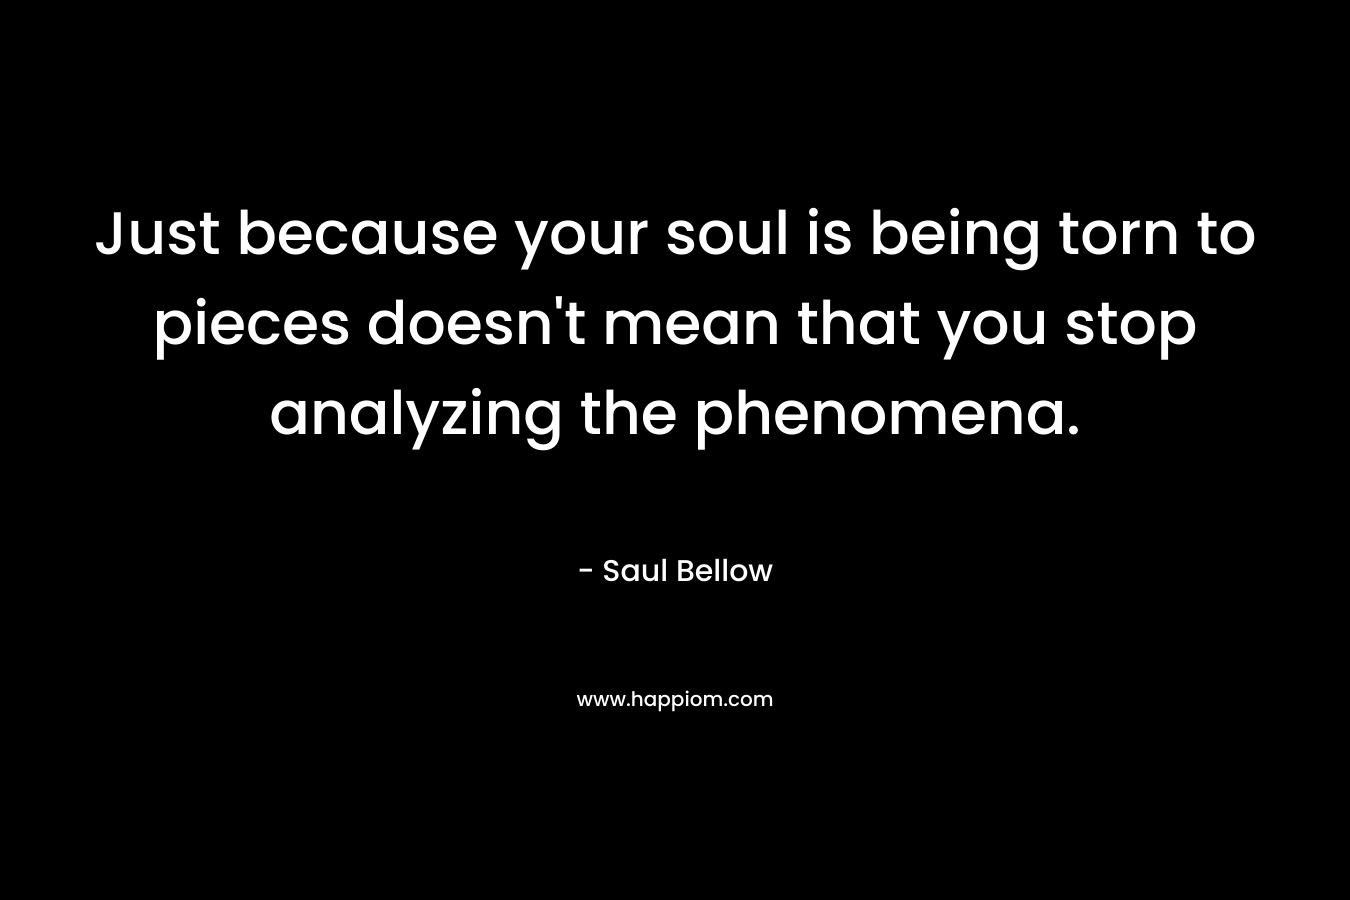 Just because your soul is being torn to pieces doesn't mean that you stop analyzing the phenomena.